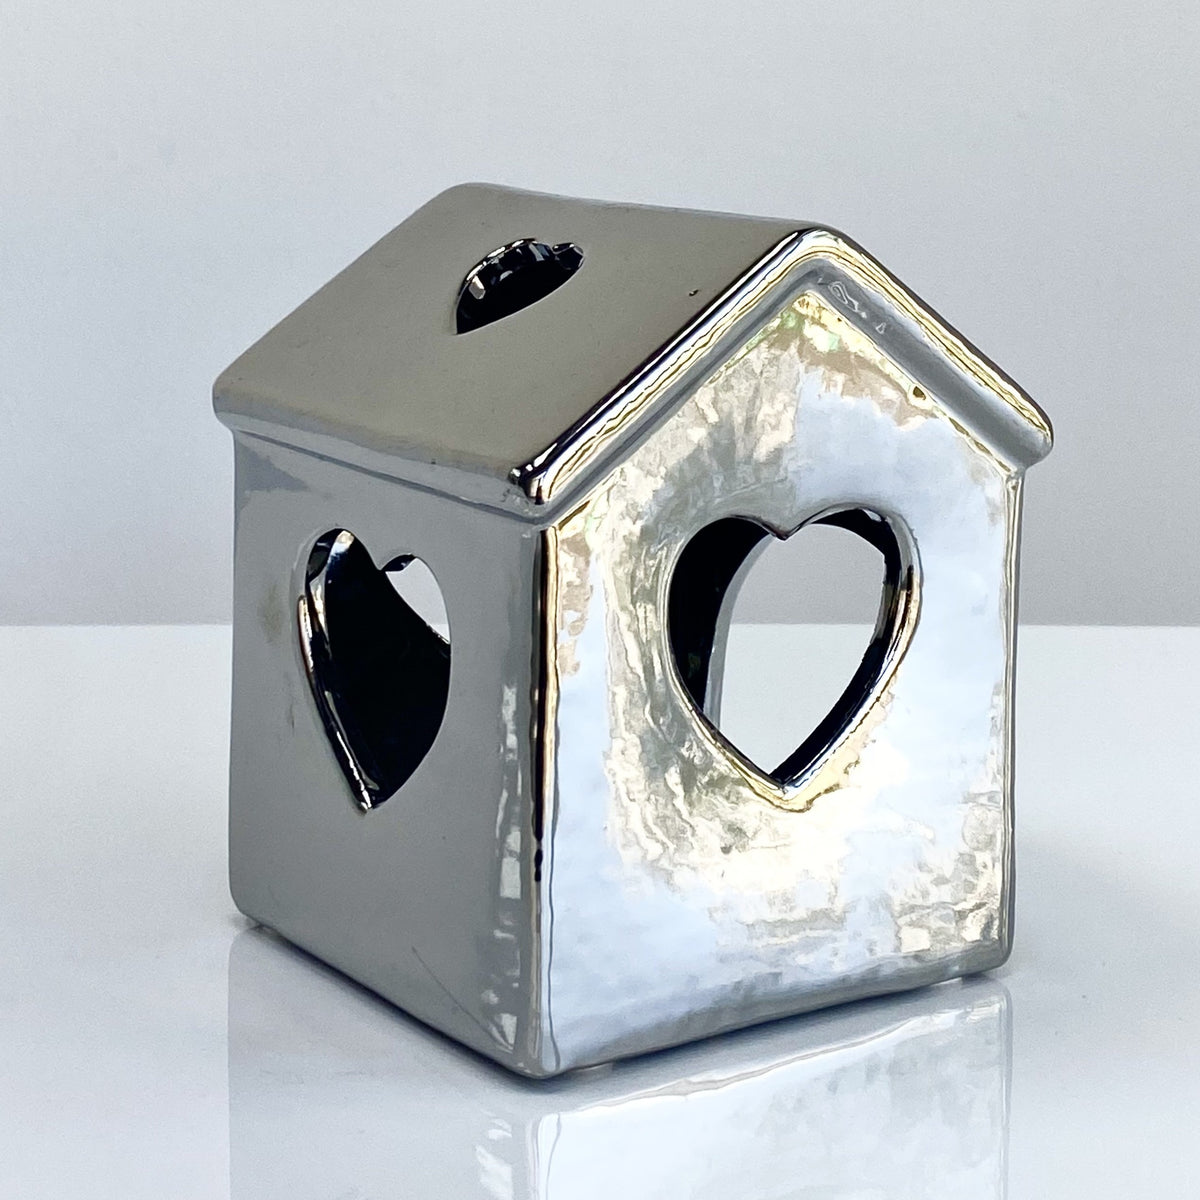 Little Silver Ceramic House With Heart